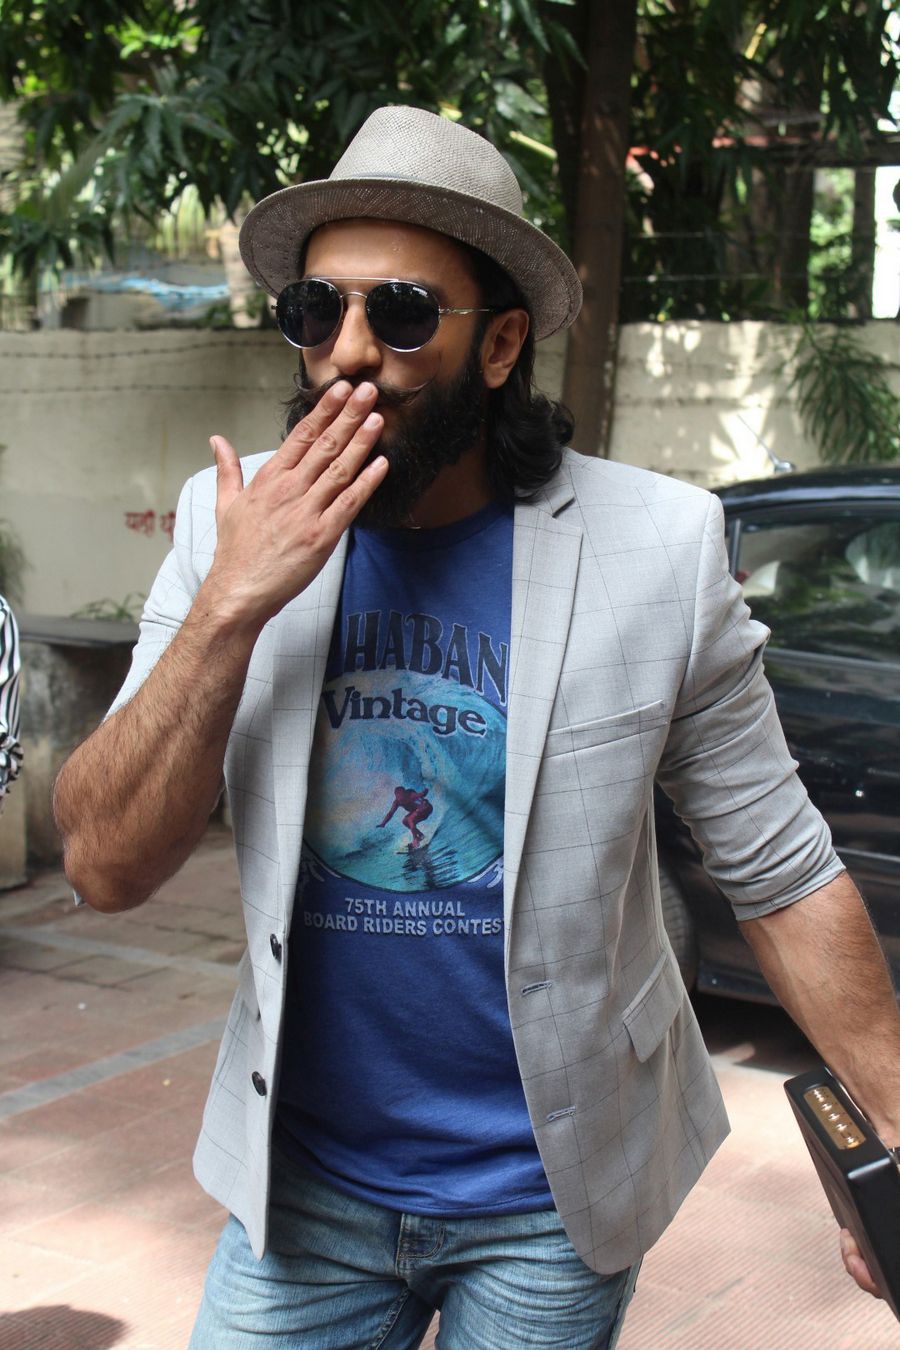 Ranveer Singh & Neha Dhupia to be Spotted Stills